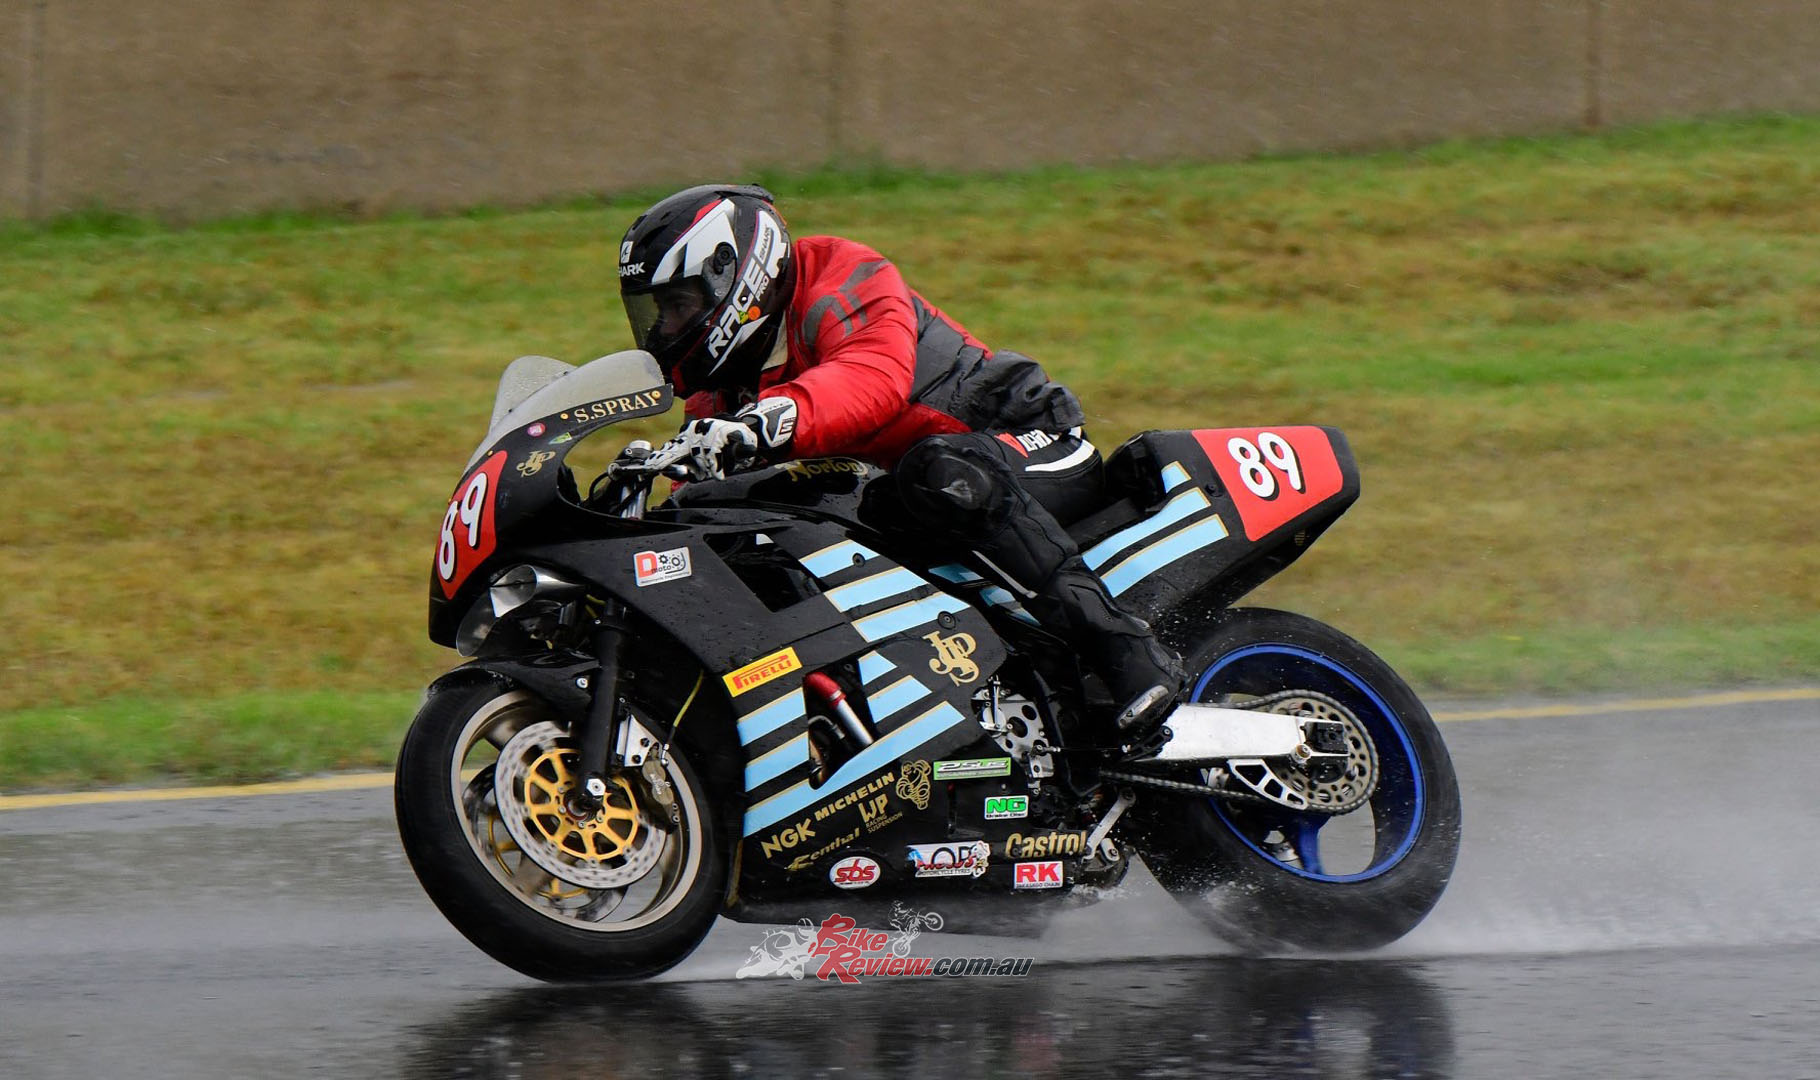 "To give you an indication of just how much power this bike has, a similar FZR1000 race bike I know of has more torque than a current R1 superbike." Now imagine riding it in the rain!